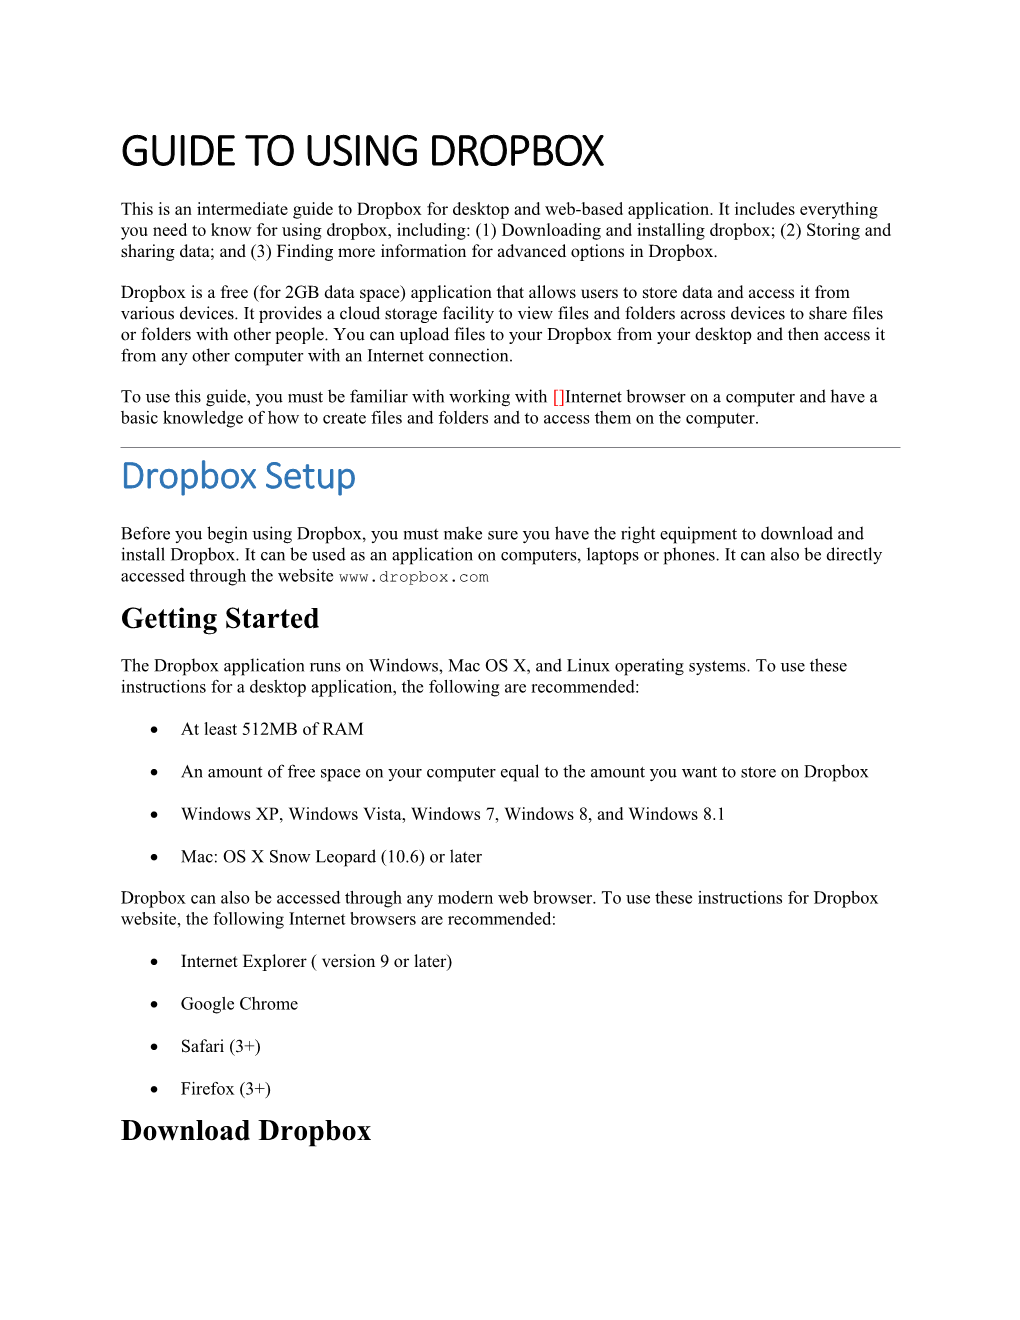 Guide to Using Dropbox